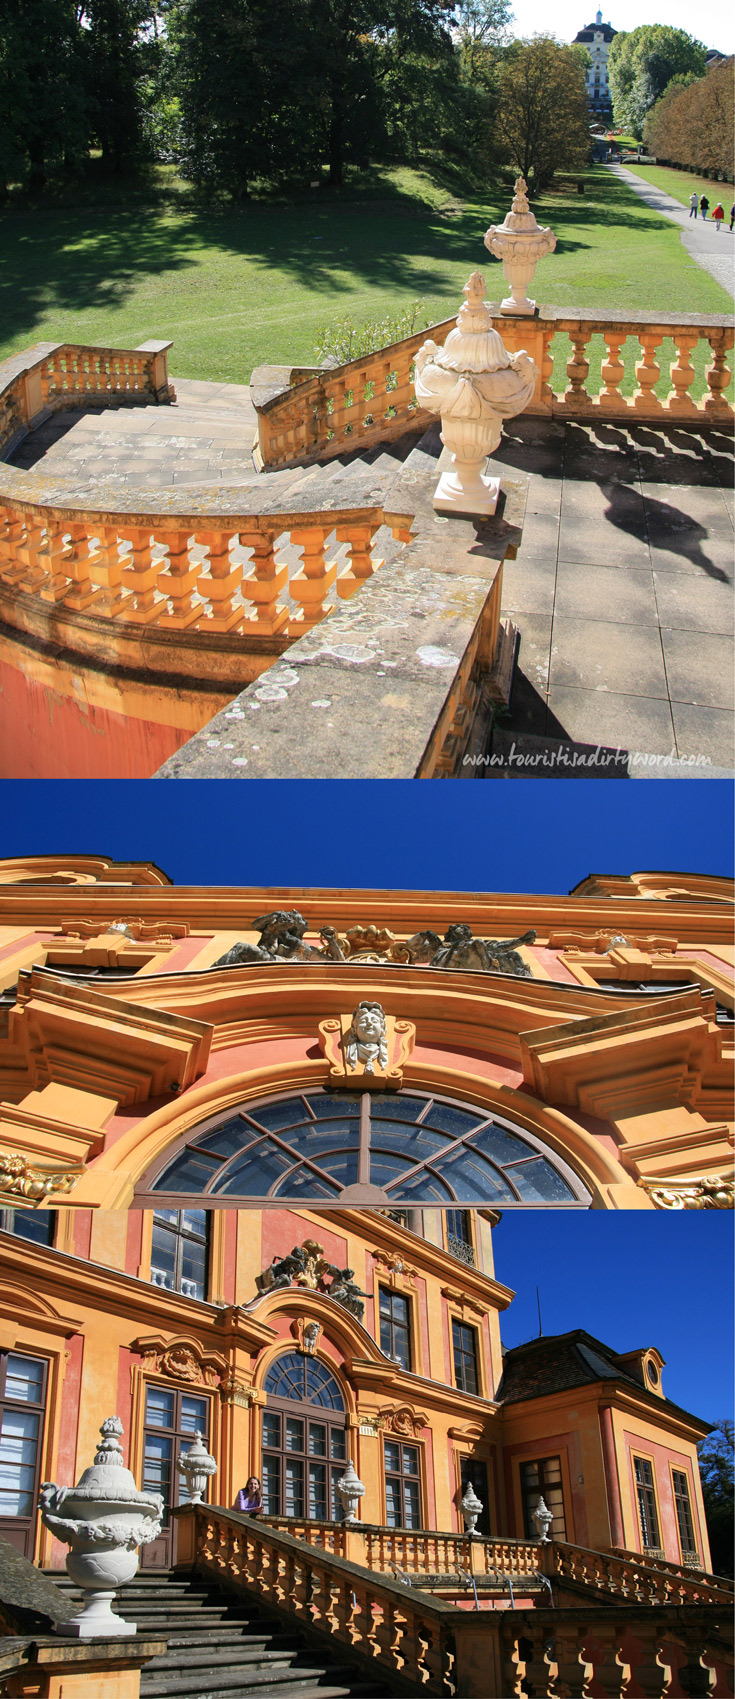 Exterior views of the Southern Facade of Ludwigsburg's Schloss Favorite | Baroque Architecture